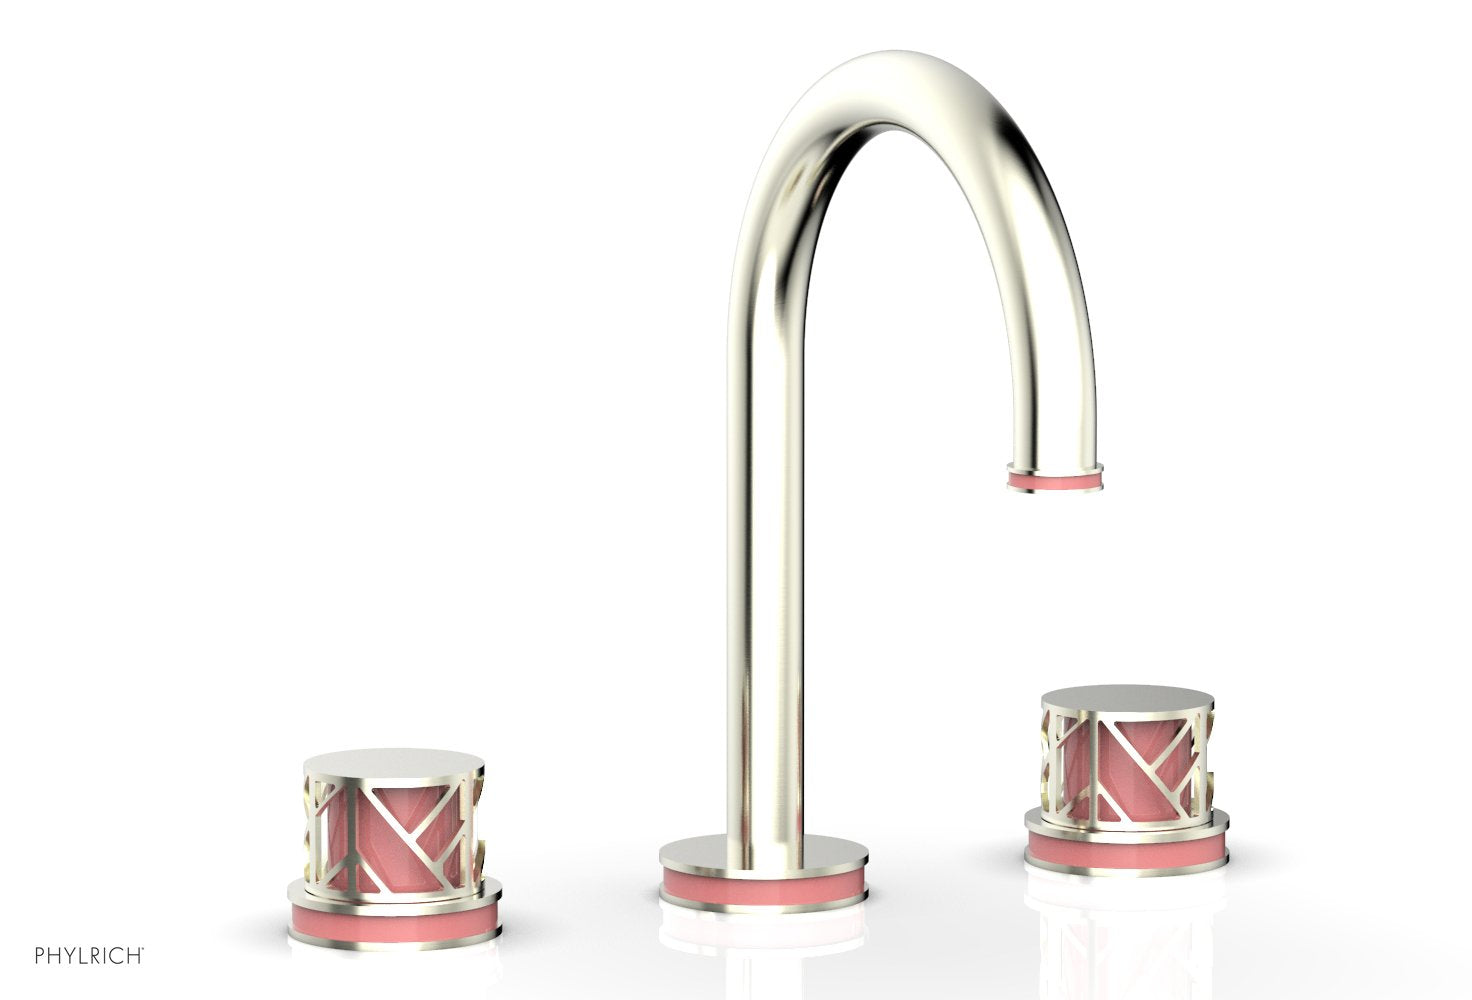 Phylrich JOLIE Widespread Faucet - Round Handles with "Pink" Accents